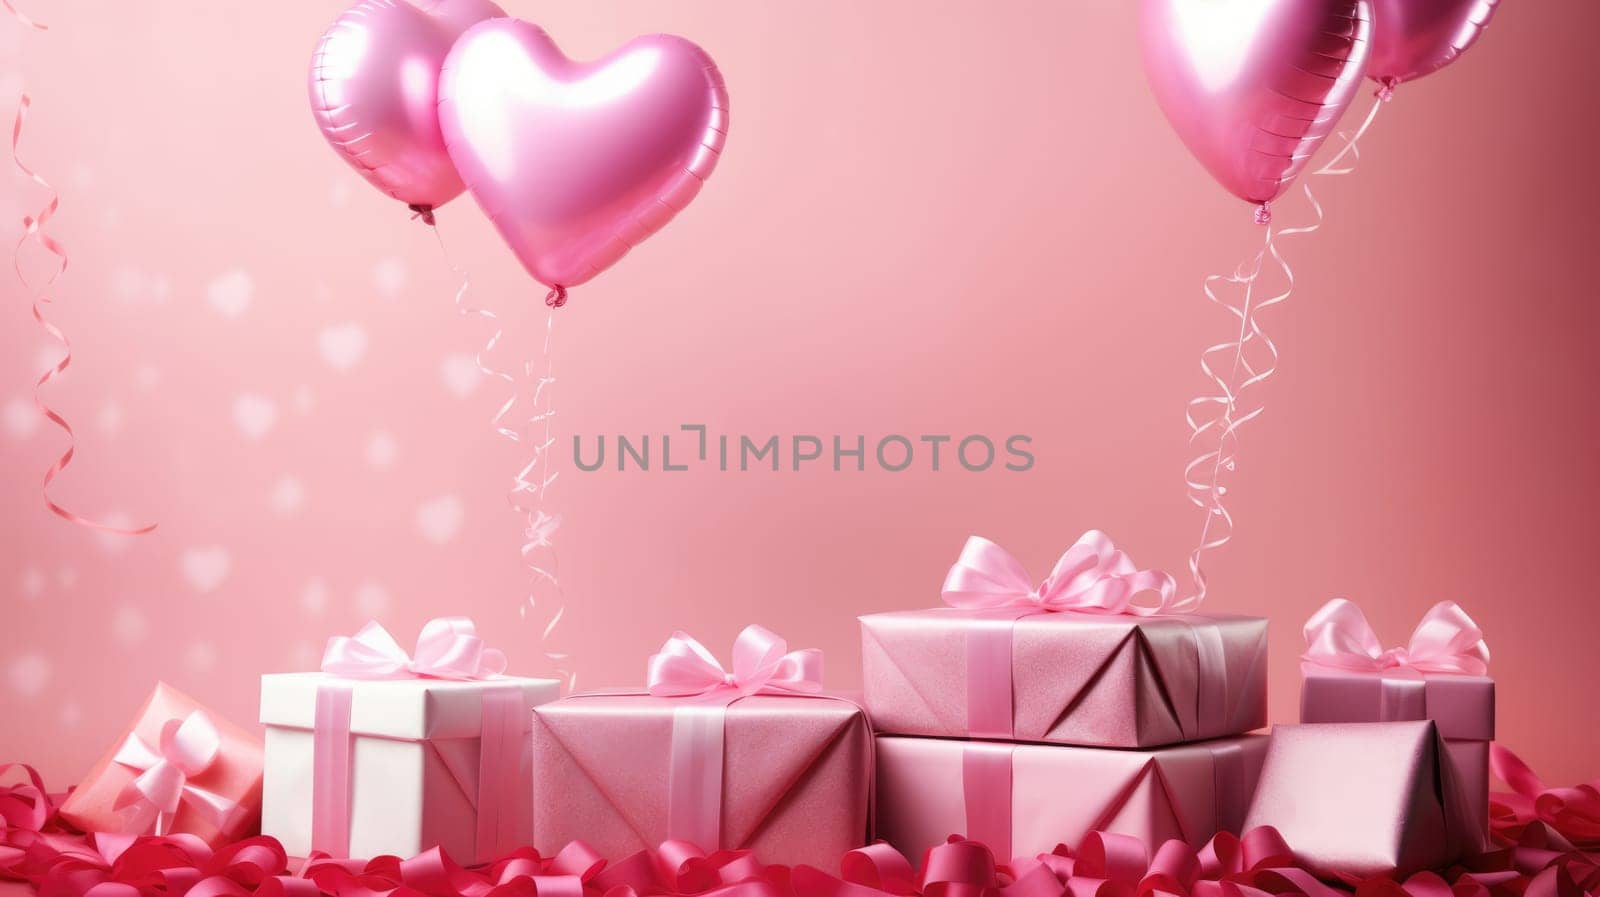 Valentine Day gift. Romantic pink background with balloons hearts and gift box by natali_brill